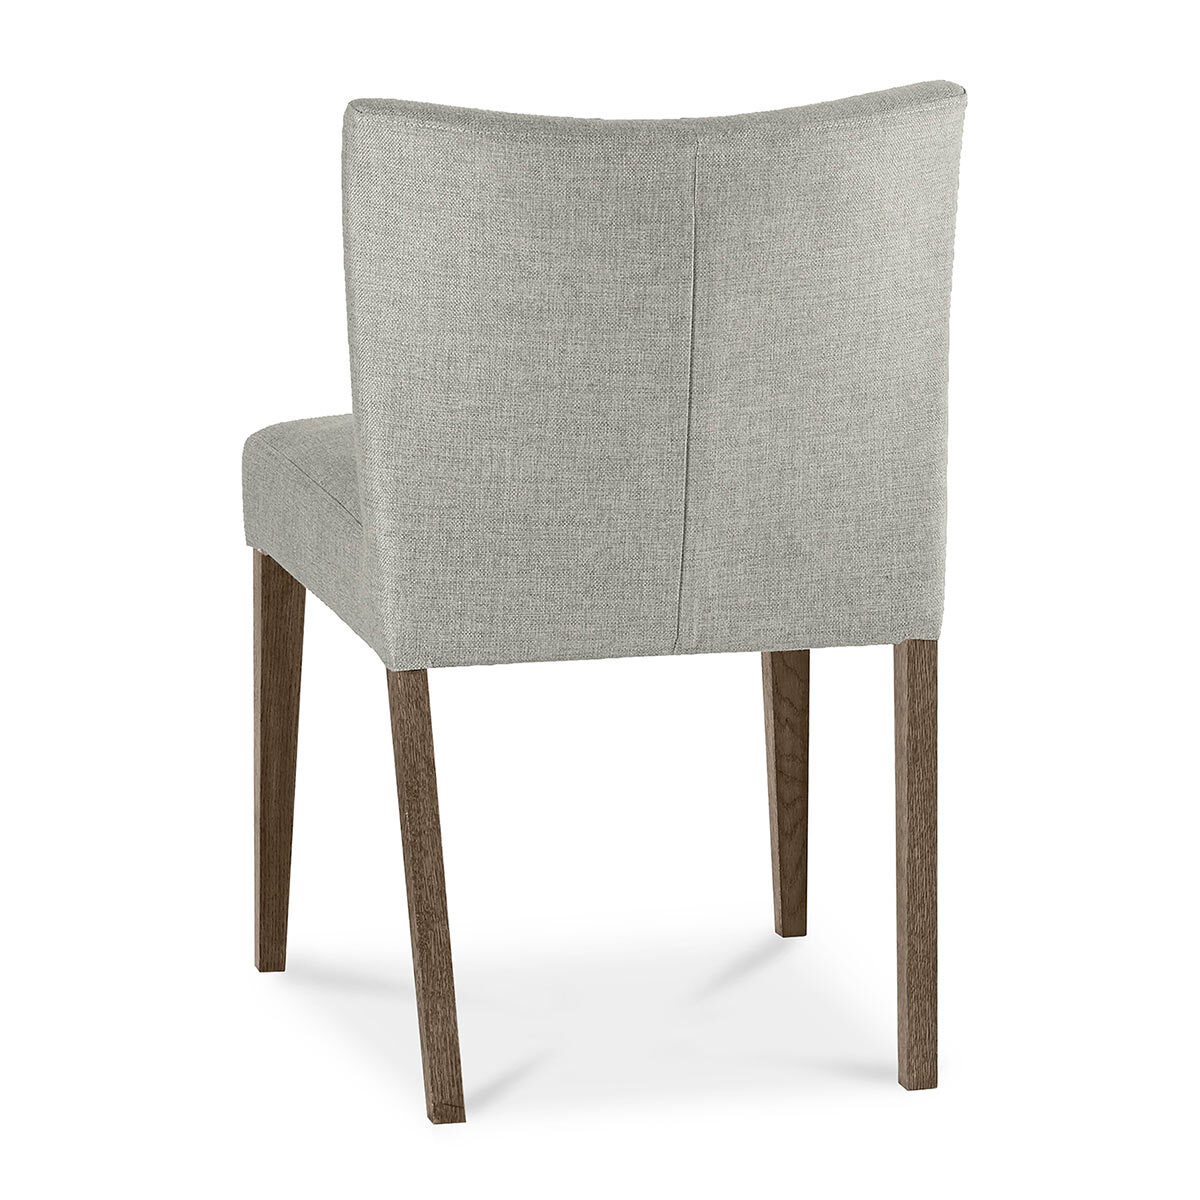 Back image of Milan lowback upholstered grey dining chair